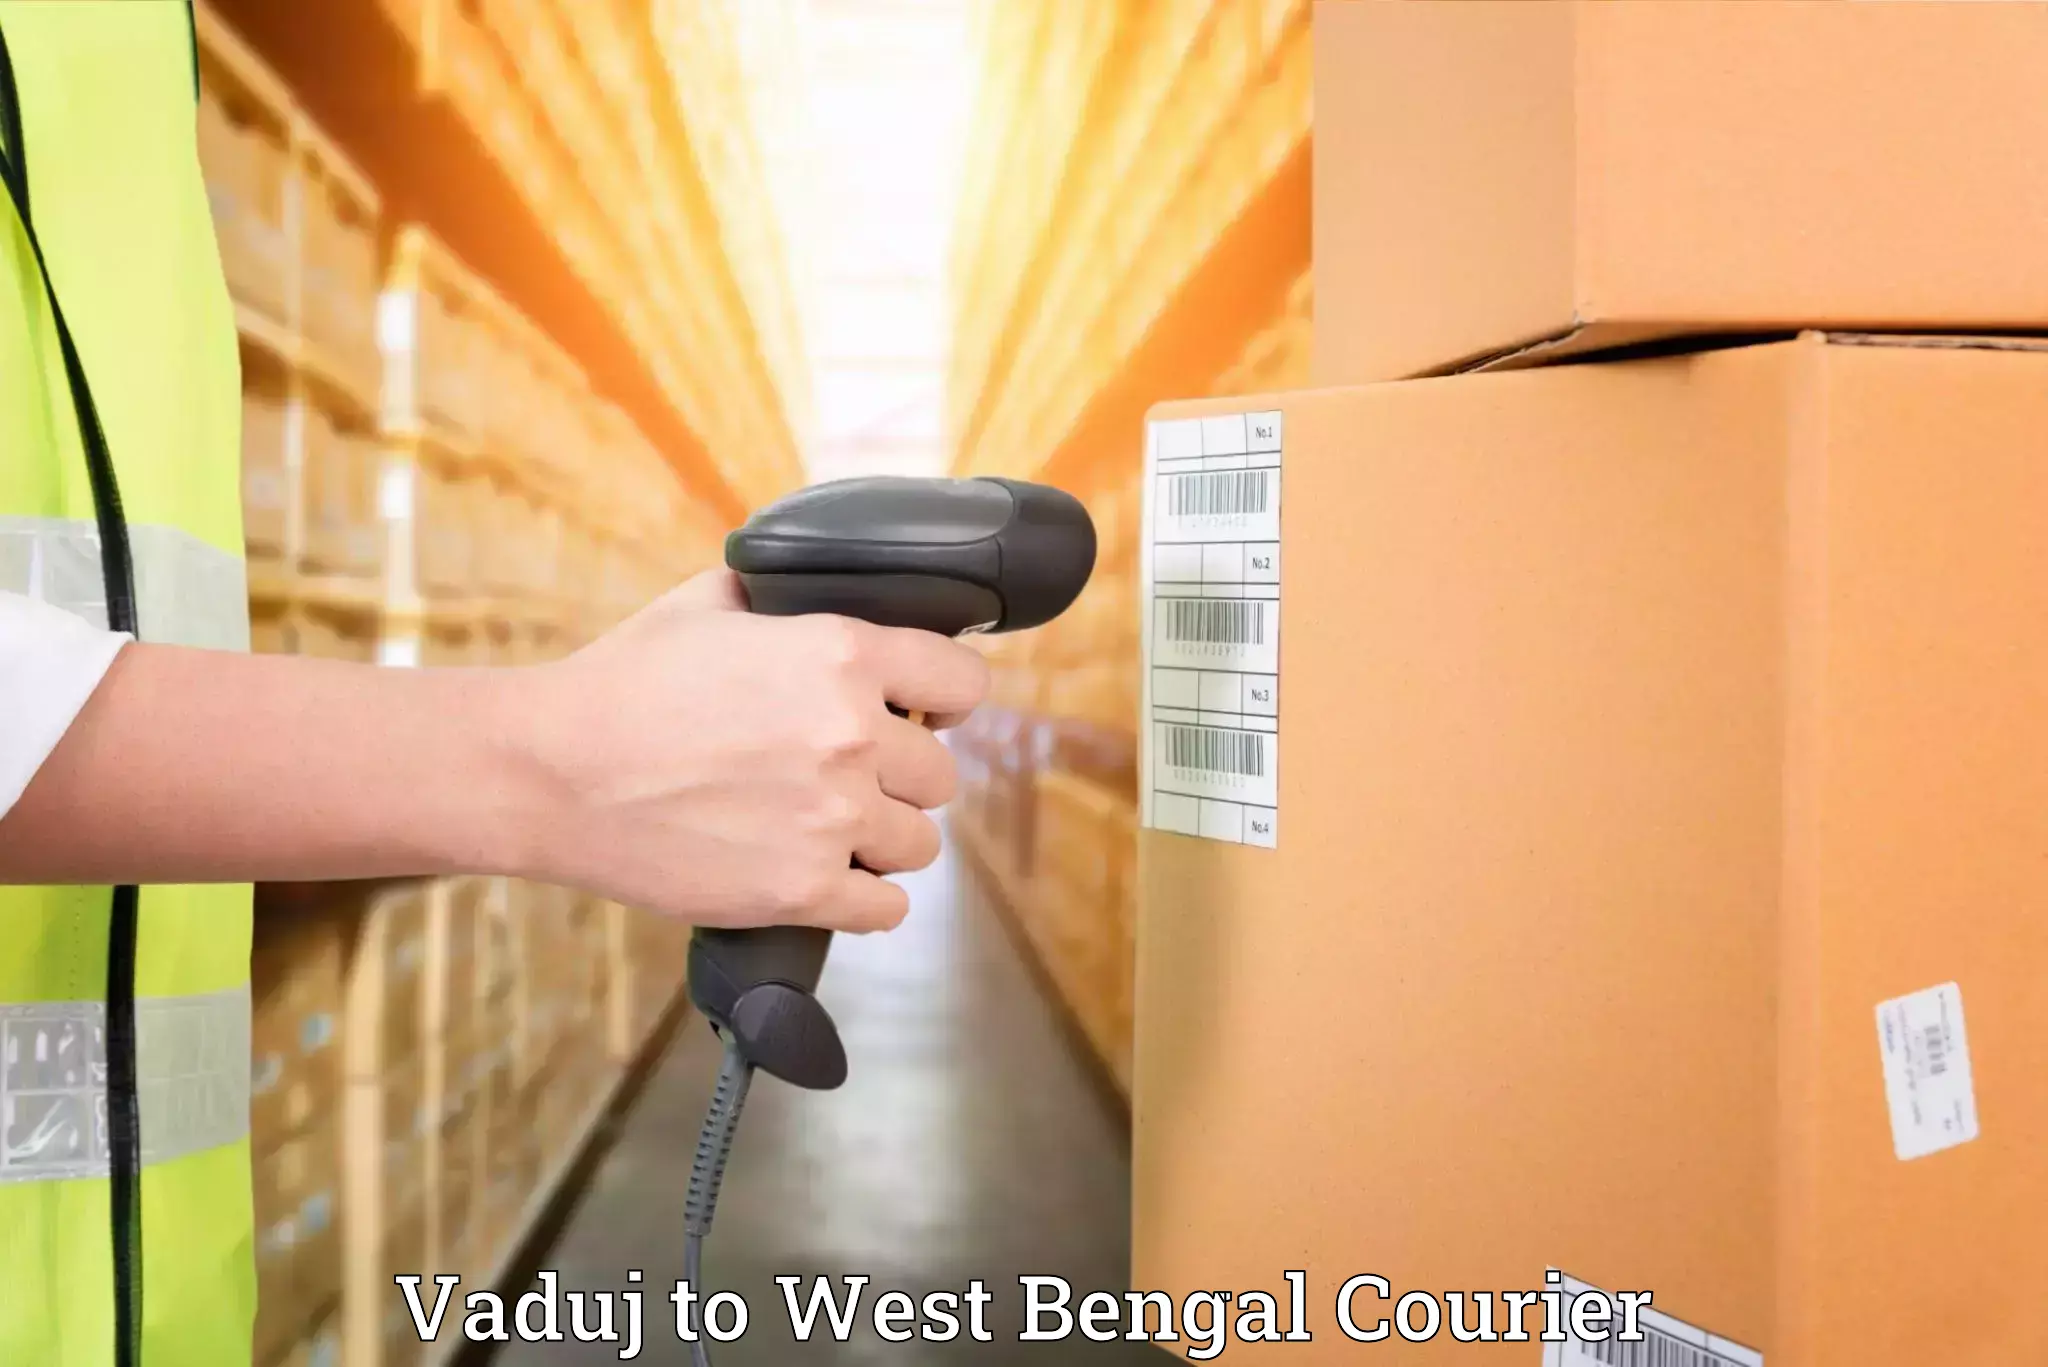 Specialized moving company in Vaduj to Mirzapur Bardhaman